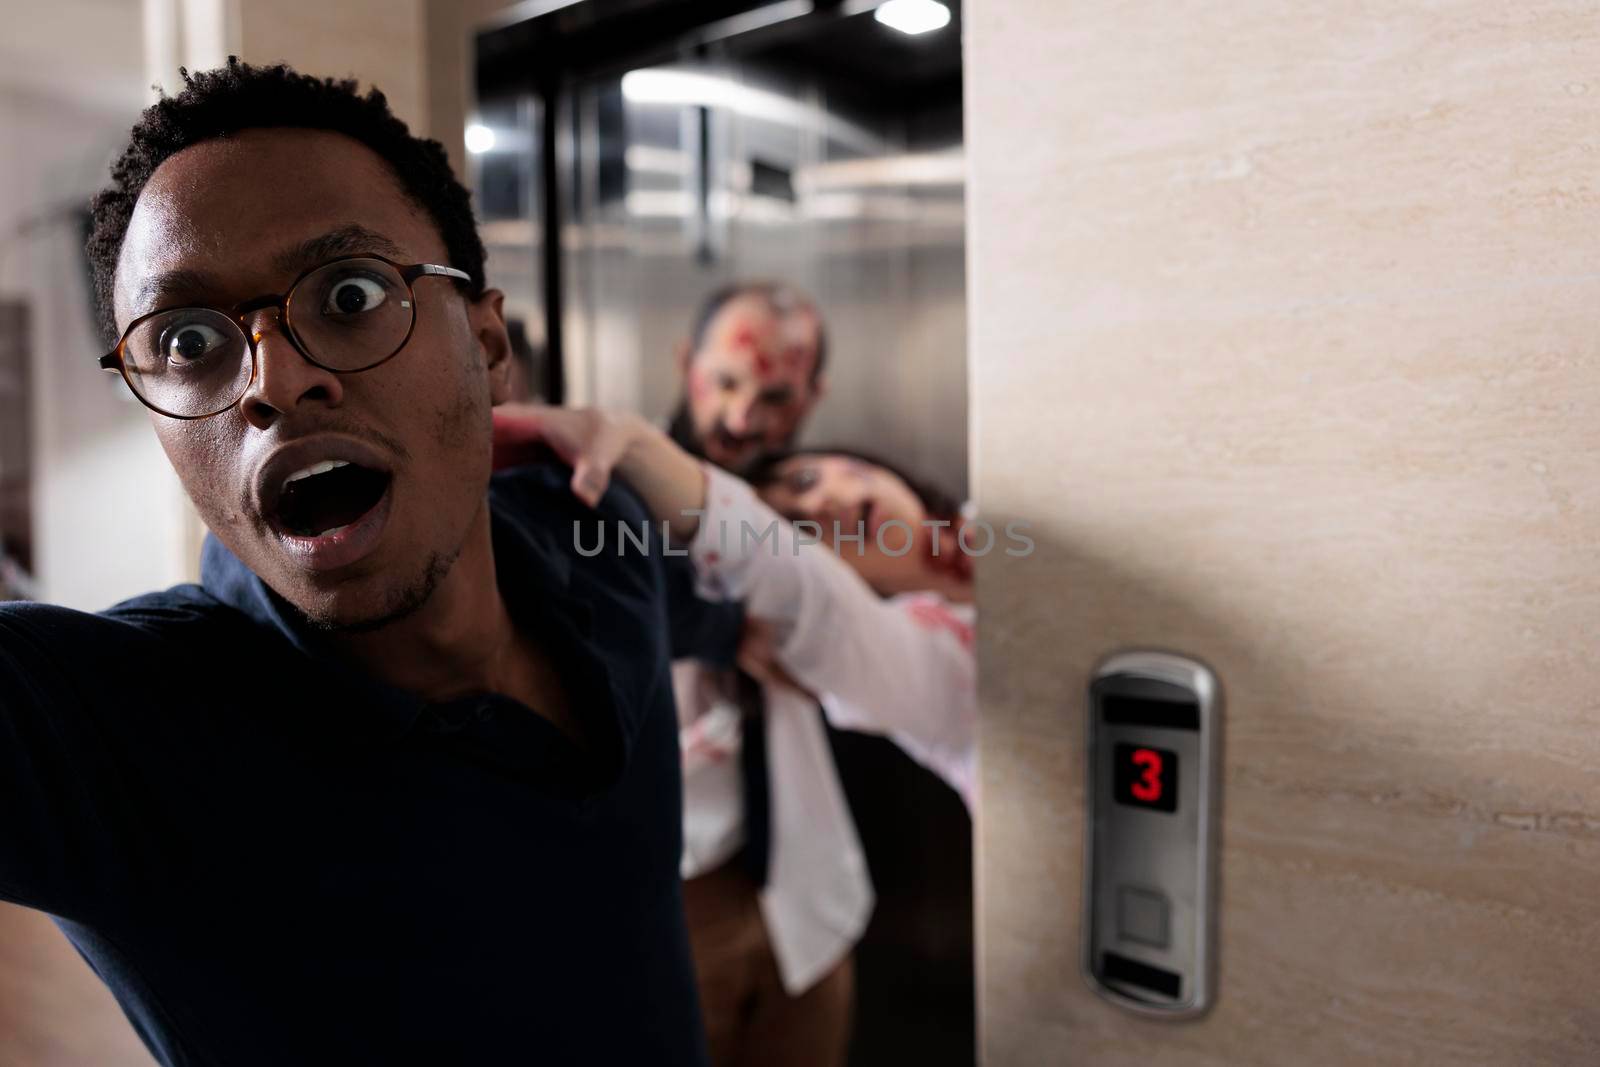 Frightened man running from evil zombies, trying to escape elevator from terrifying scary walkers. Brain eating monsters chasing and grabbing person, undead creepy walking dead corpses.